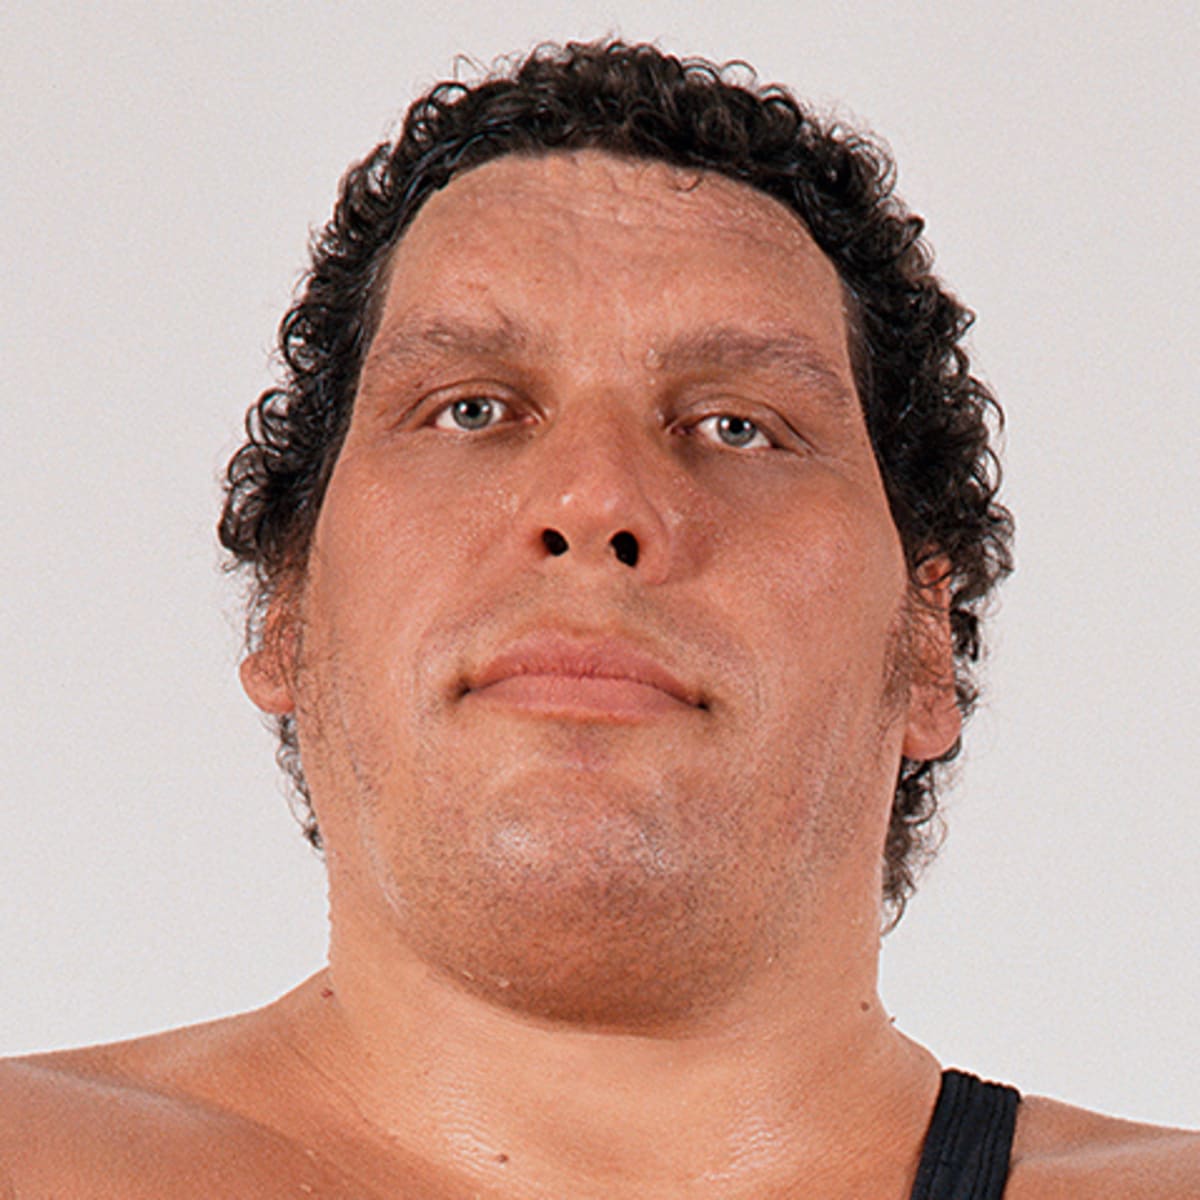 How Tall was Andre the Giant 